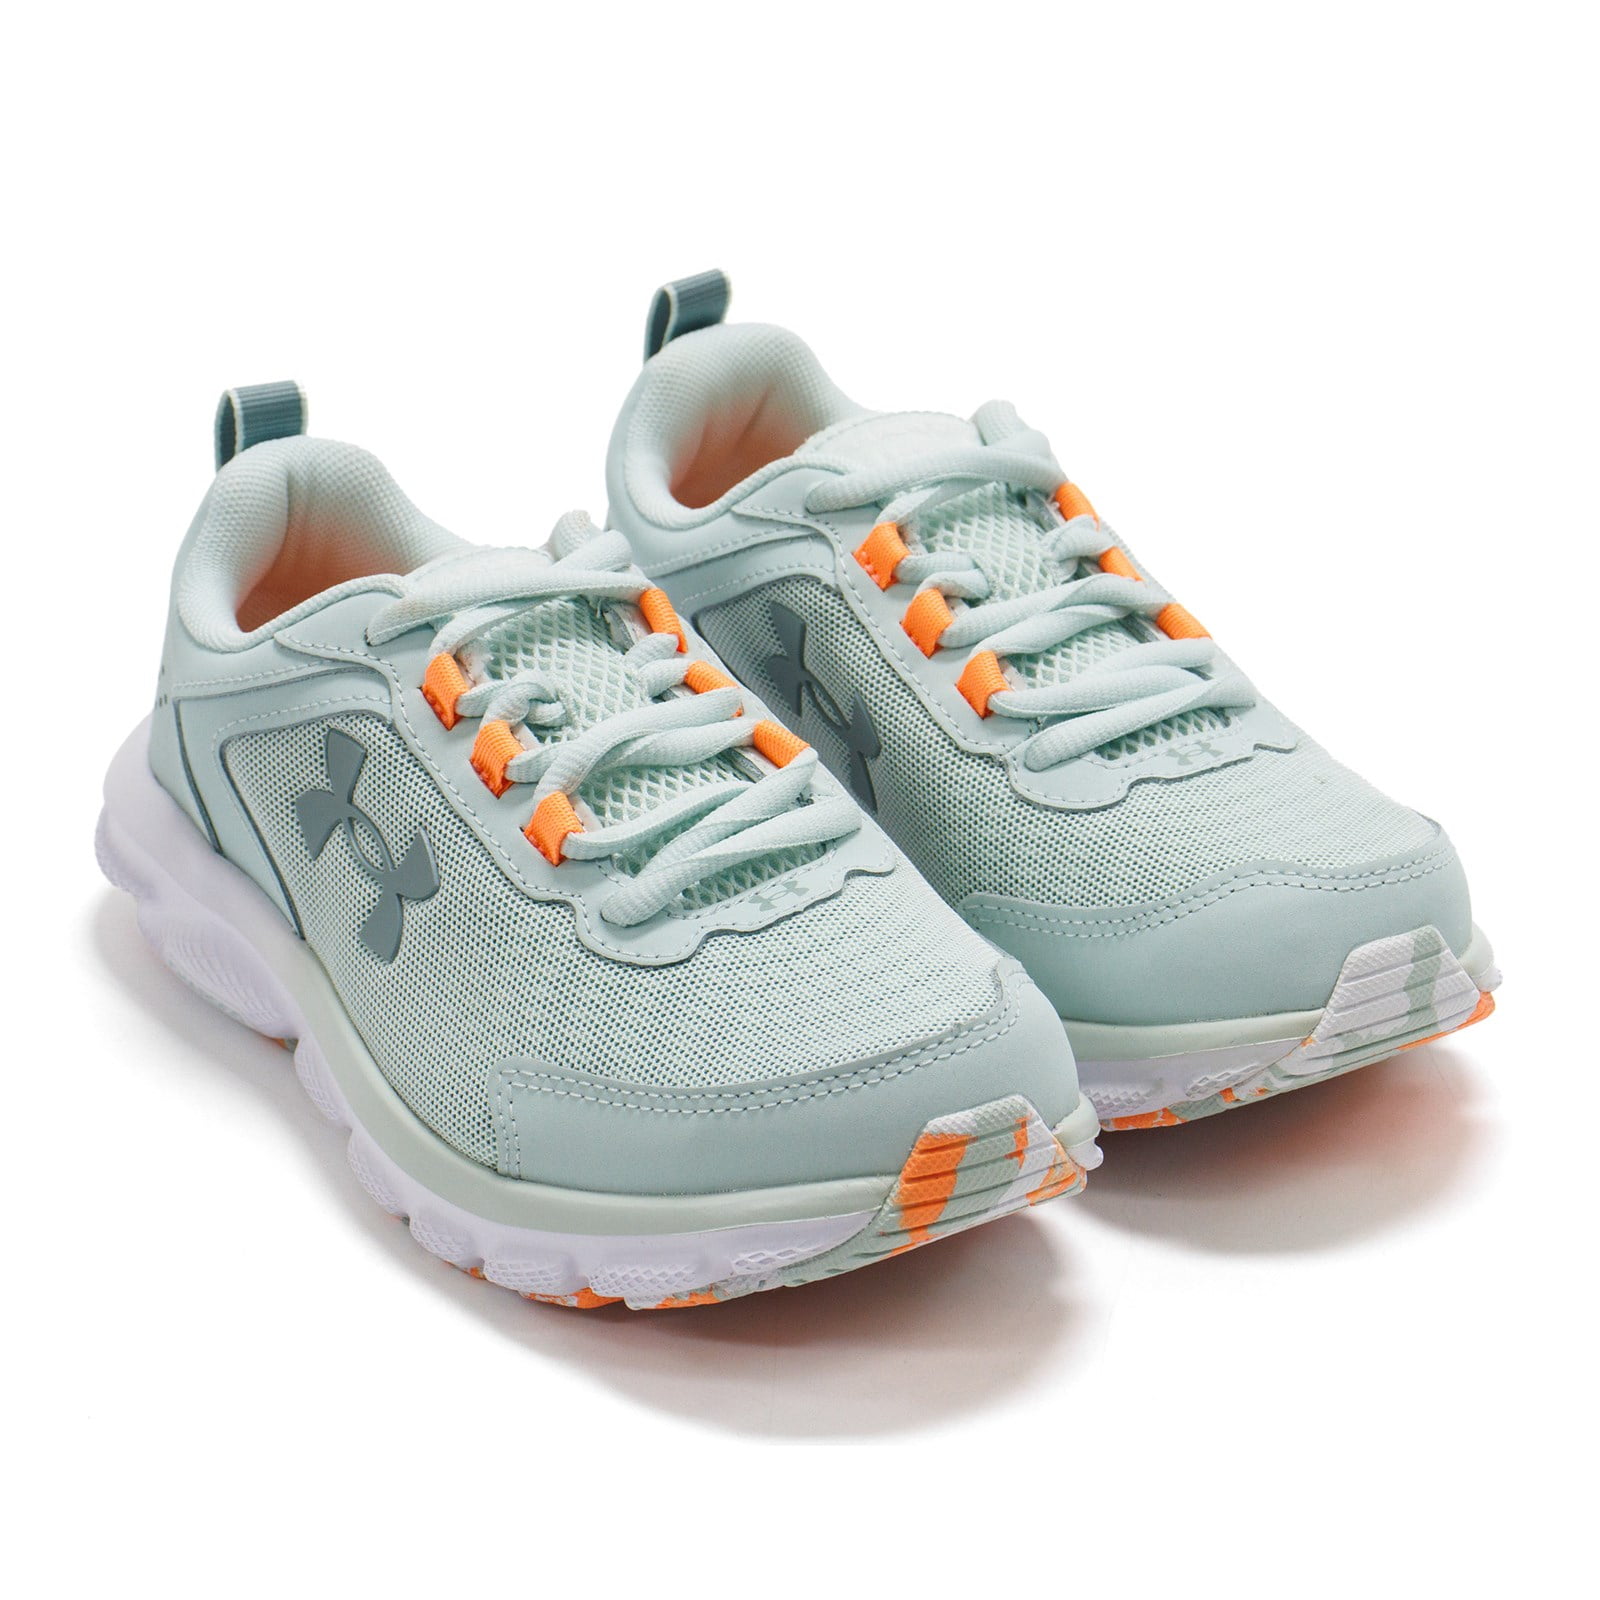 Nauwgezet Bestuiven Lui Under Armour Women's Charged Assert 9 Marble Wide Running Shoes, Illusion  Green \ Afterglow,5.5 W US - Walmart.com